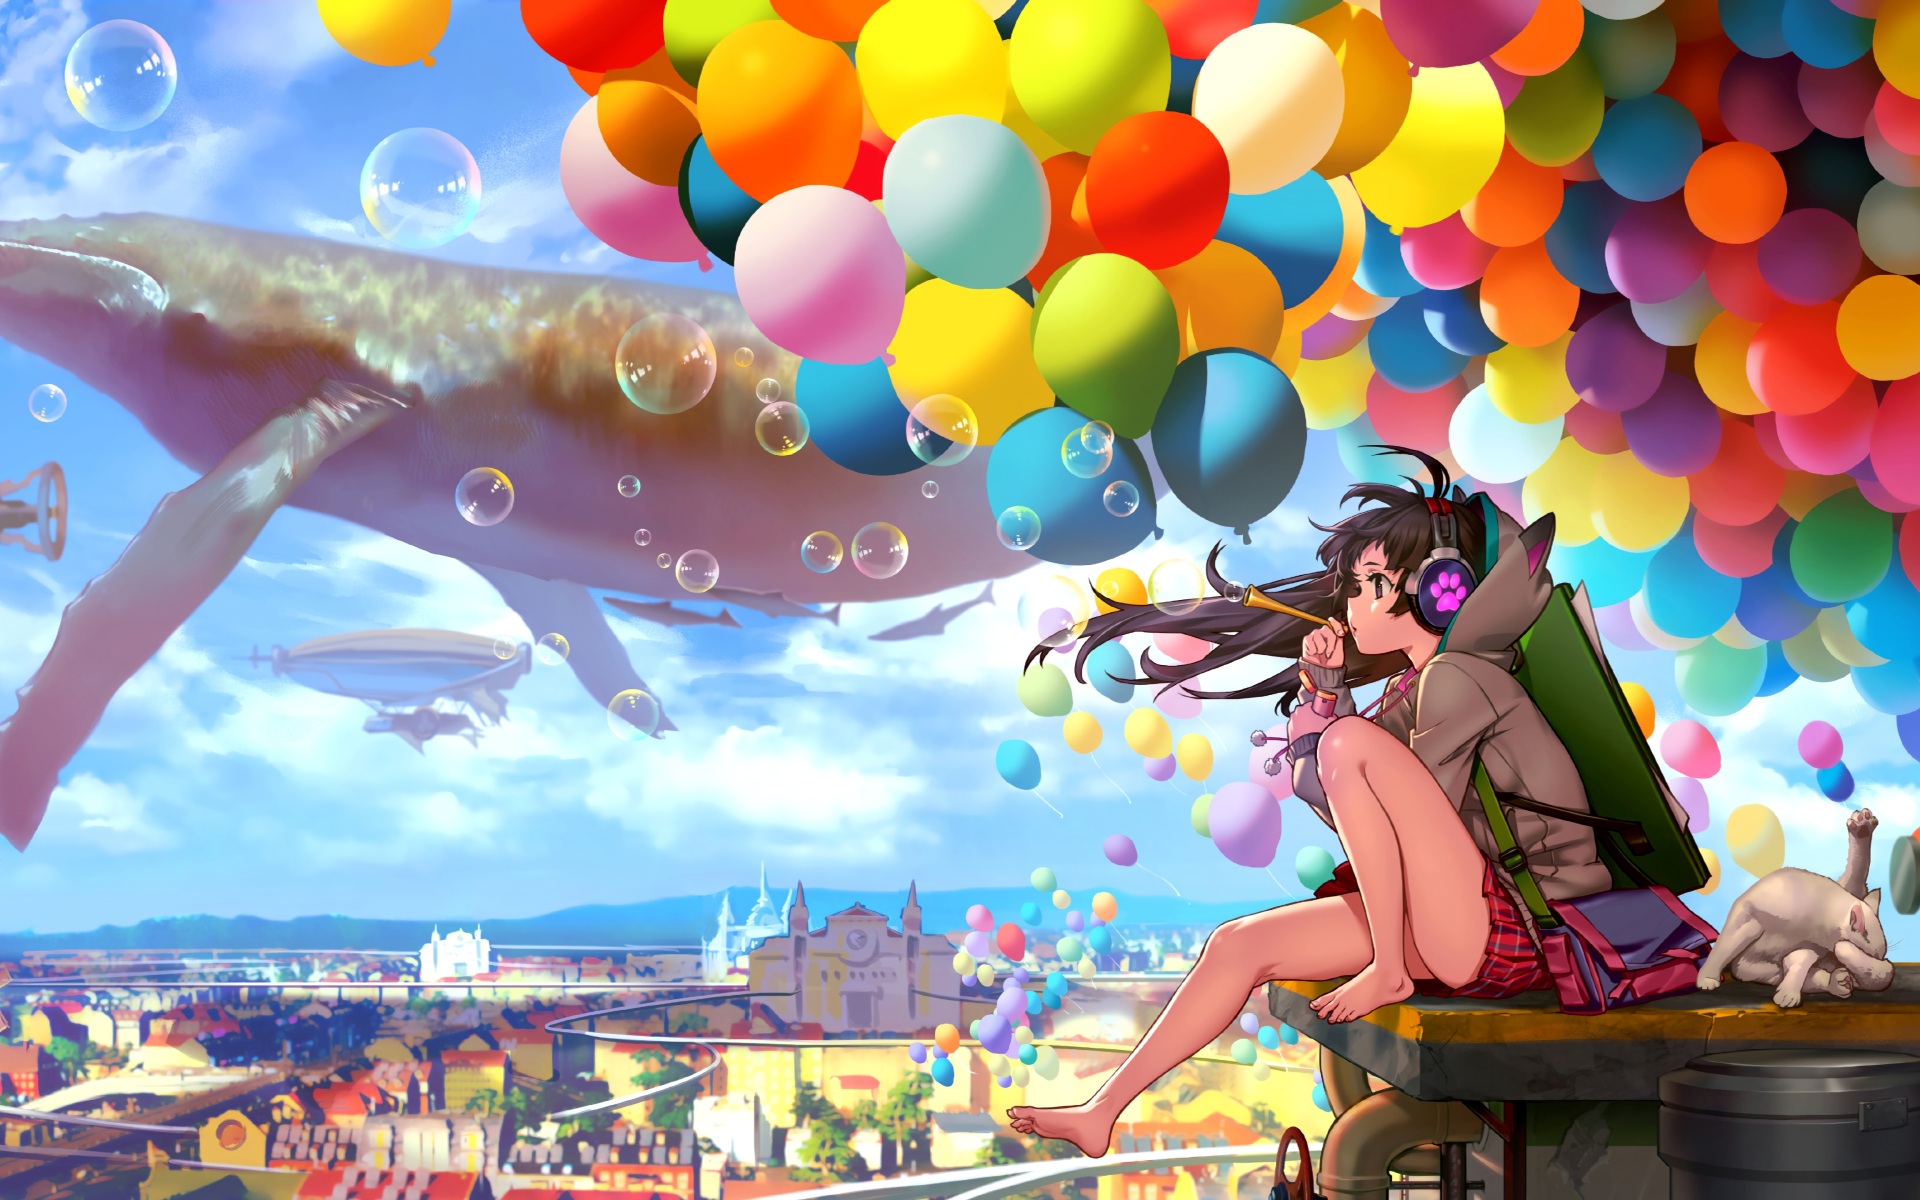 Wallpaper 4k Colorful City Anime Girl Blowing Bubbles Wallpaper